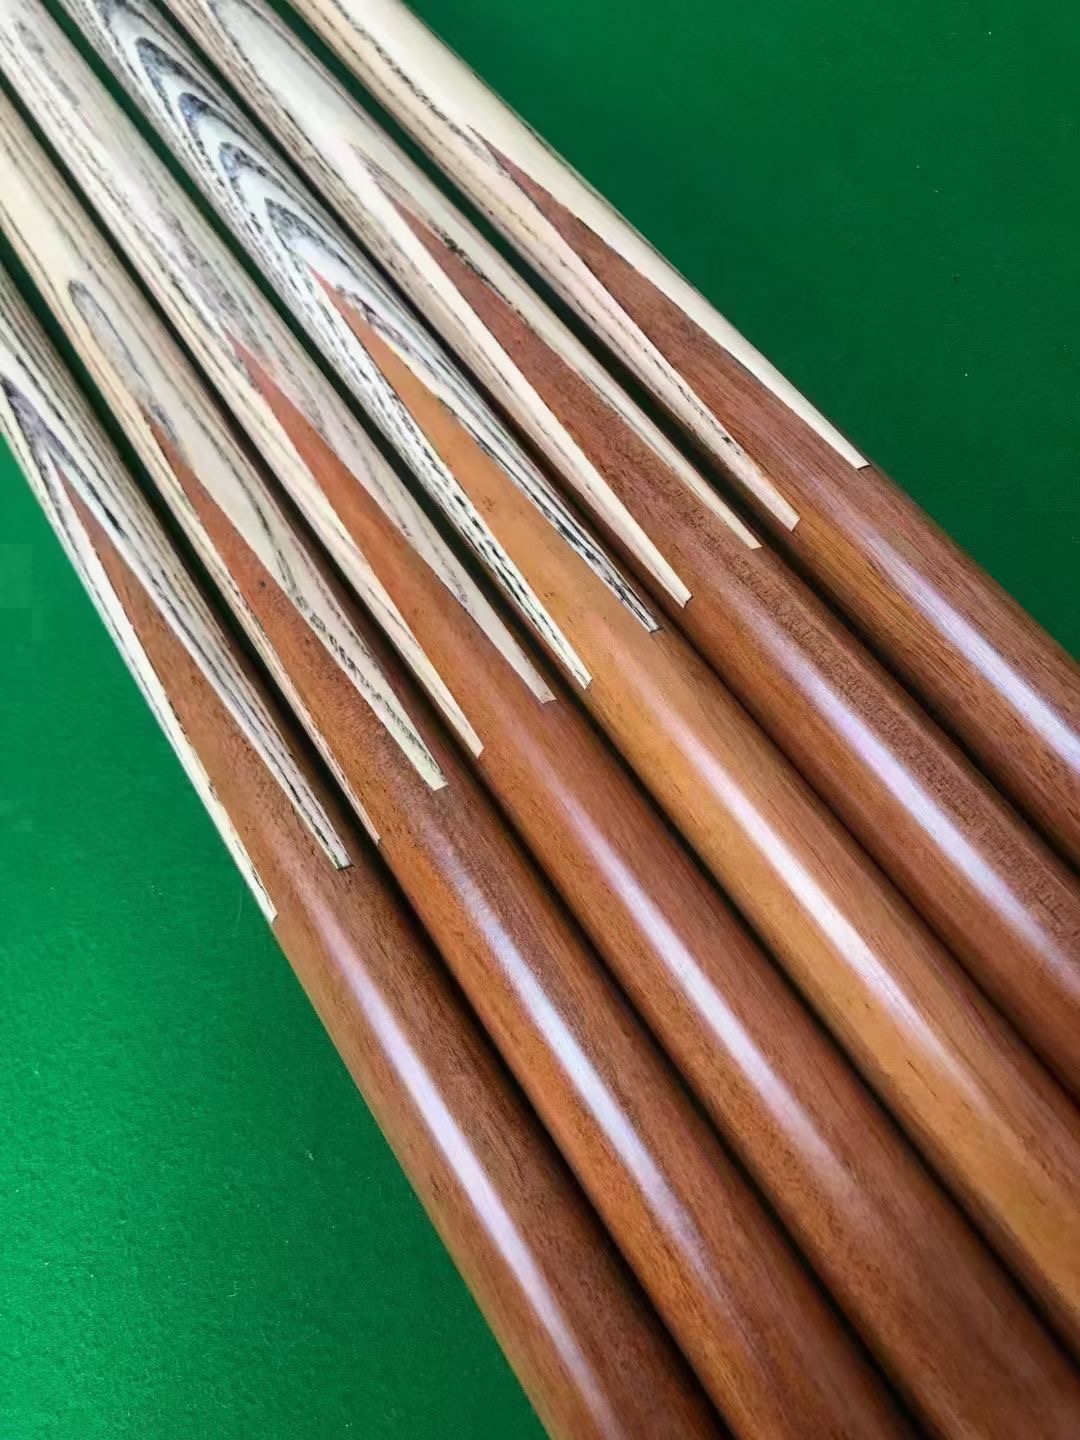 snooker cues for sale